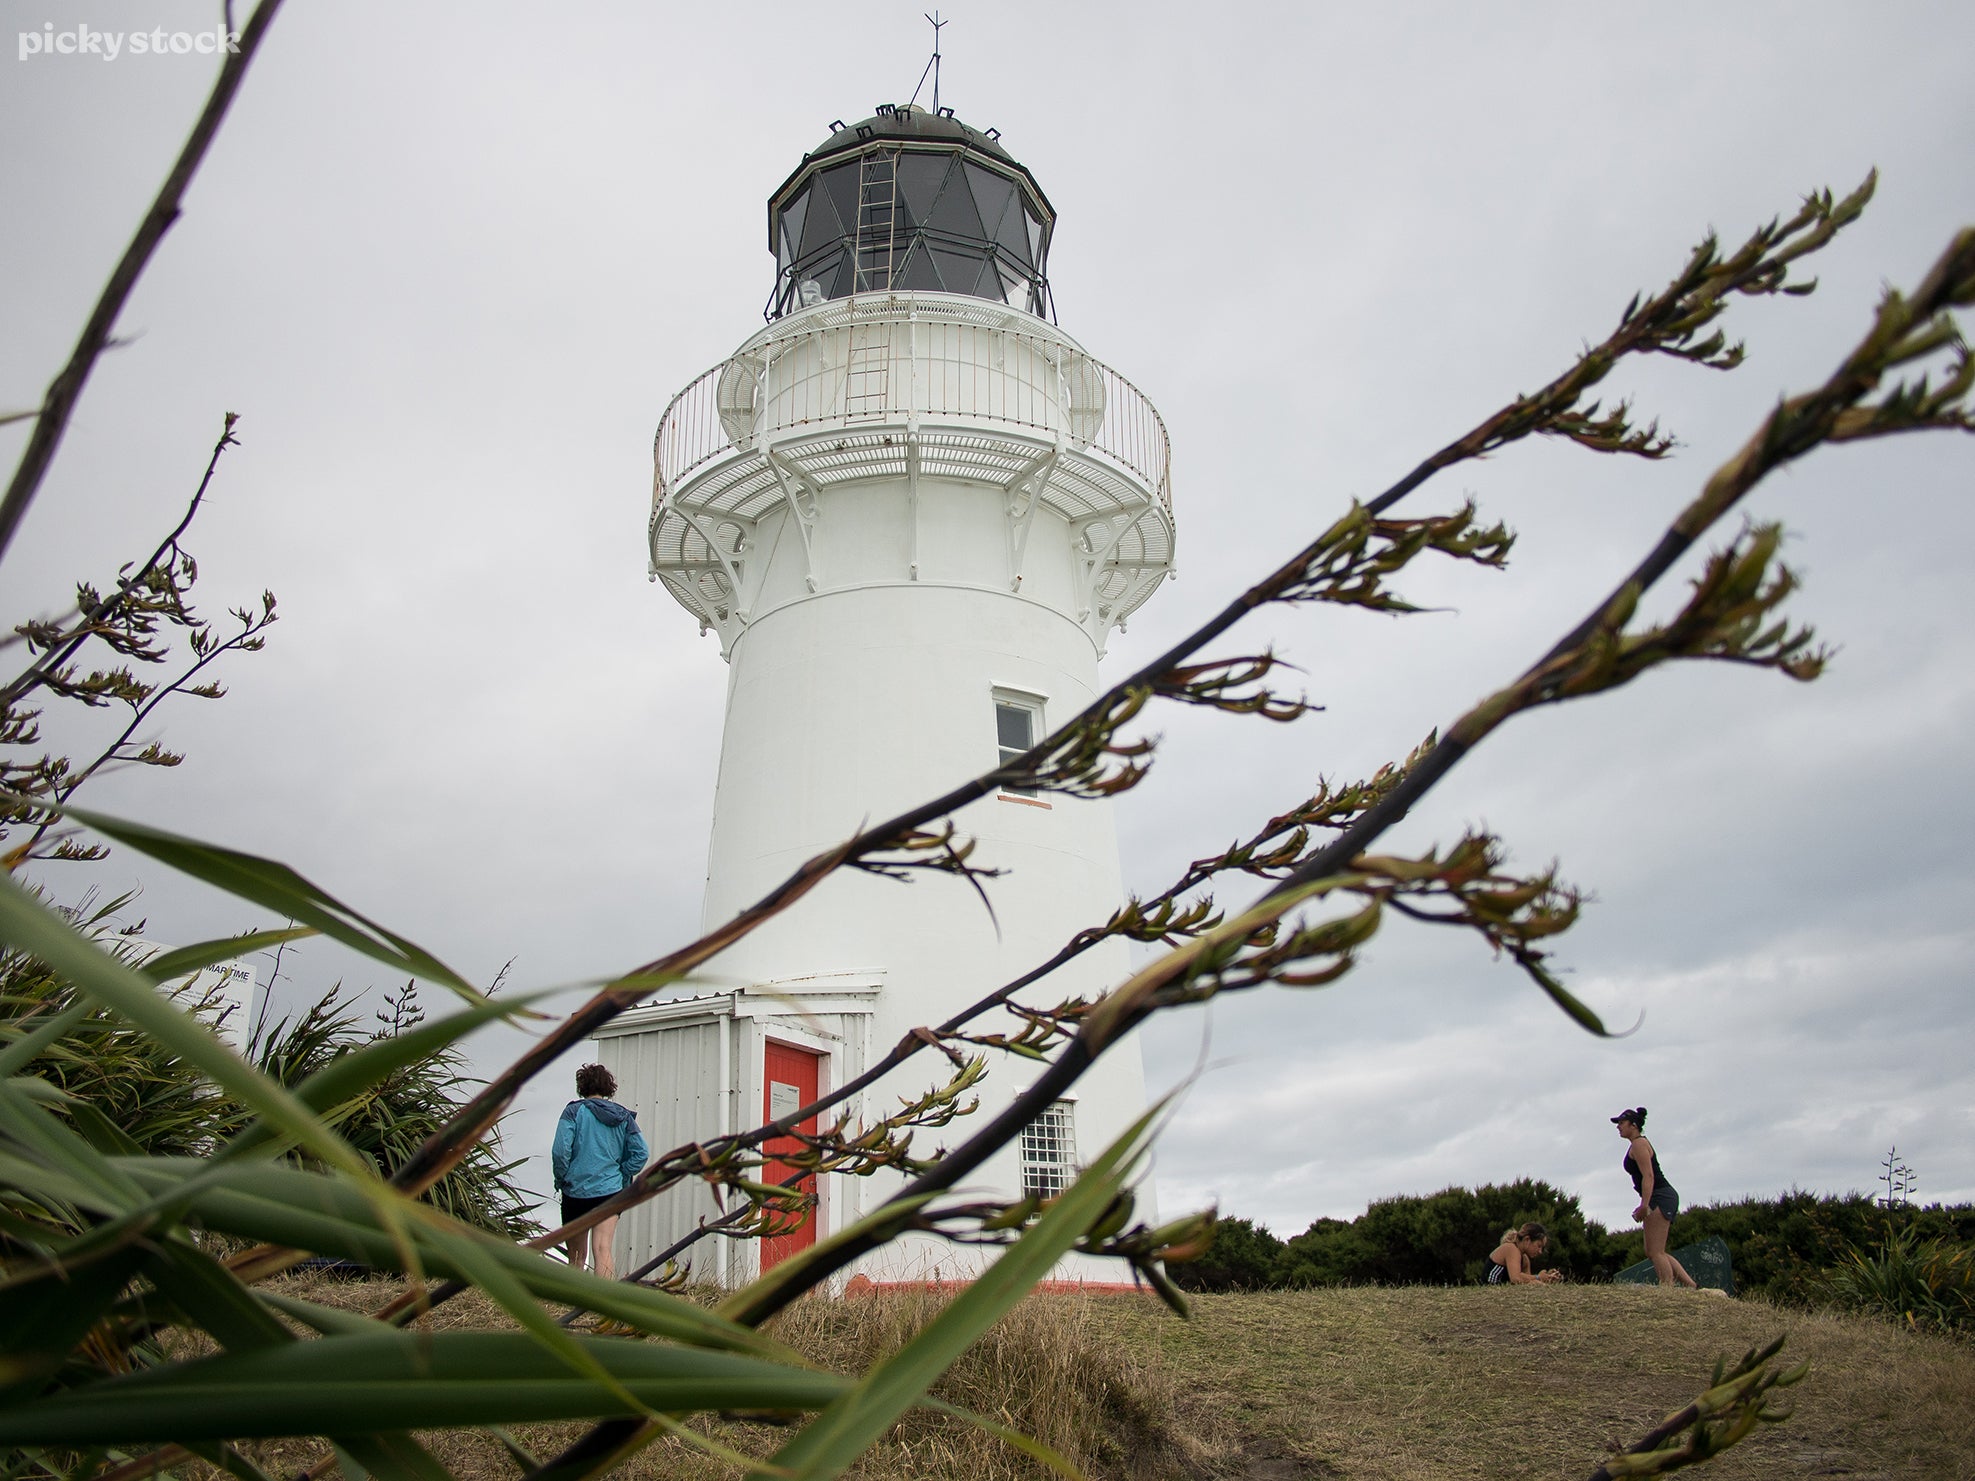 A landscape of sightseers in hiking clothes exploring the outside of a whitewashed lighthouse, with a red door and grated windows, harakeke flax surrounds the resting ground; their leaves look dim under the grey sky.